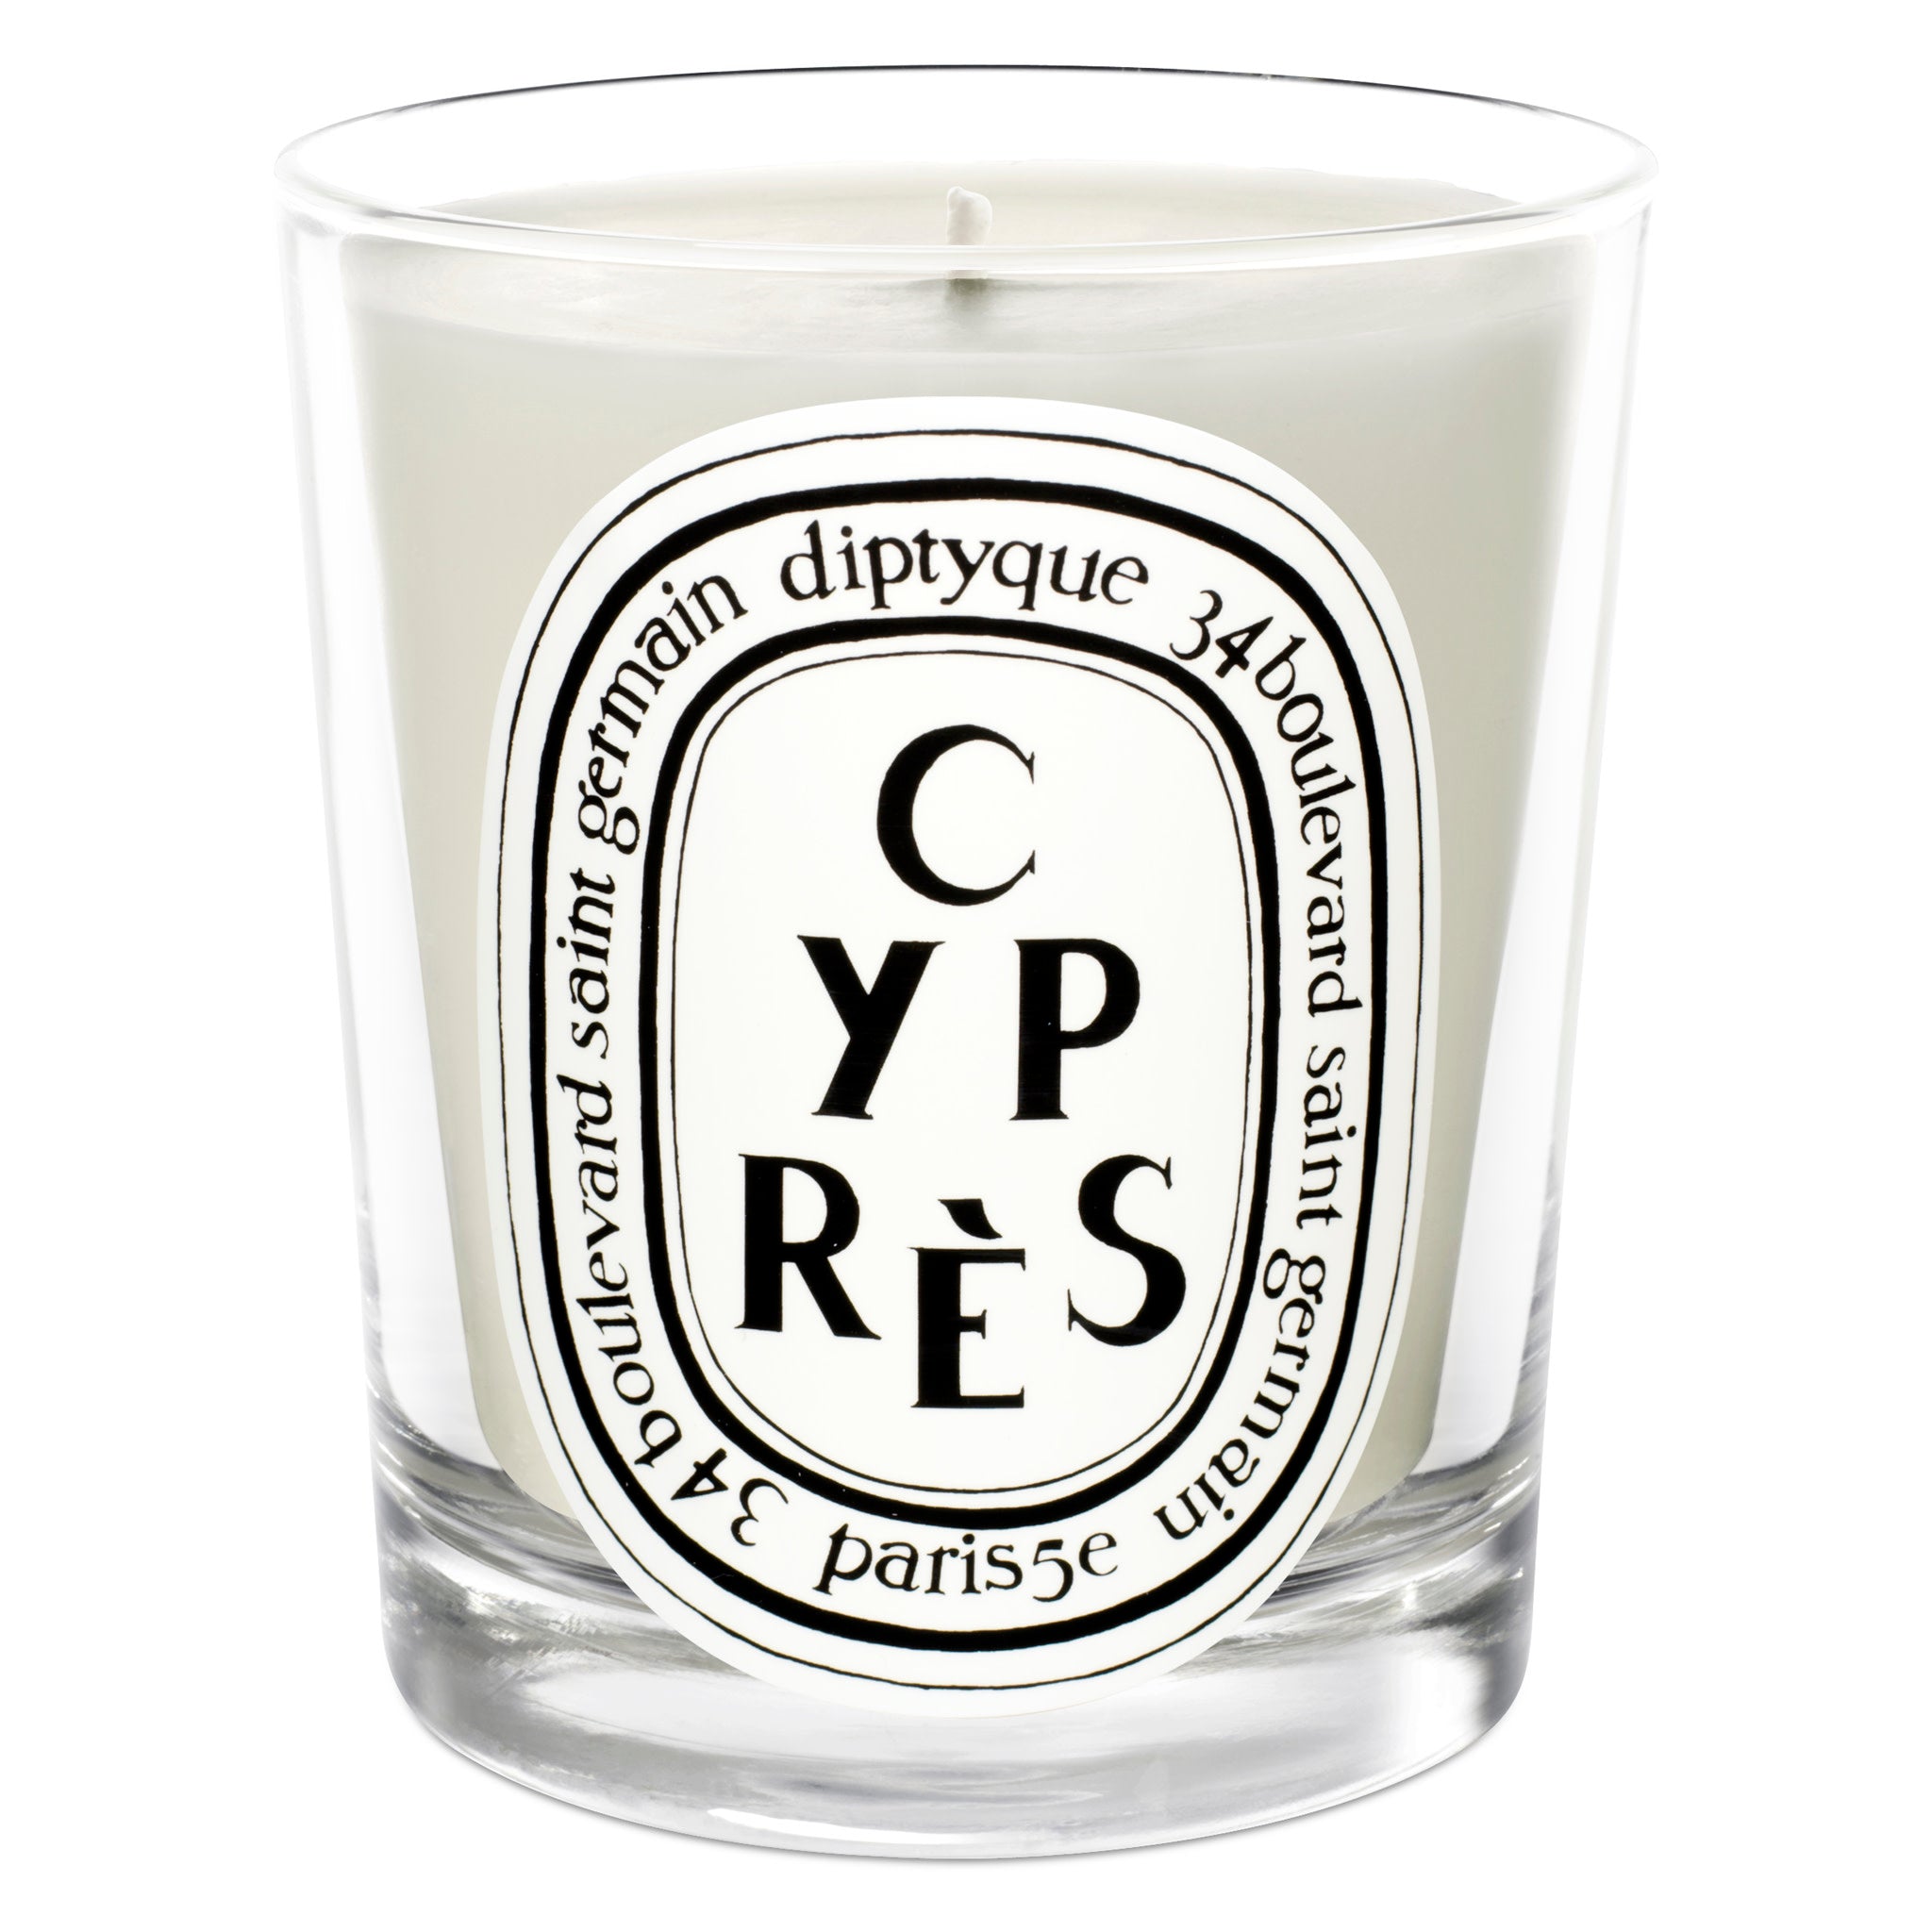 Diptyque Cypres Scented Candle Size variant: 6.5 oz main image.